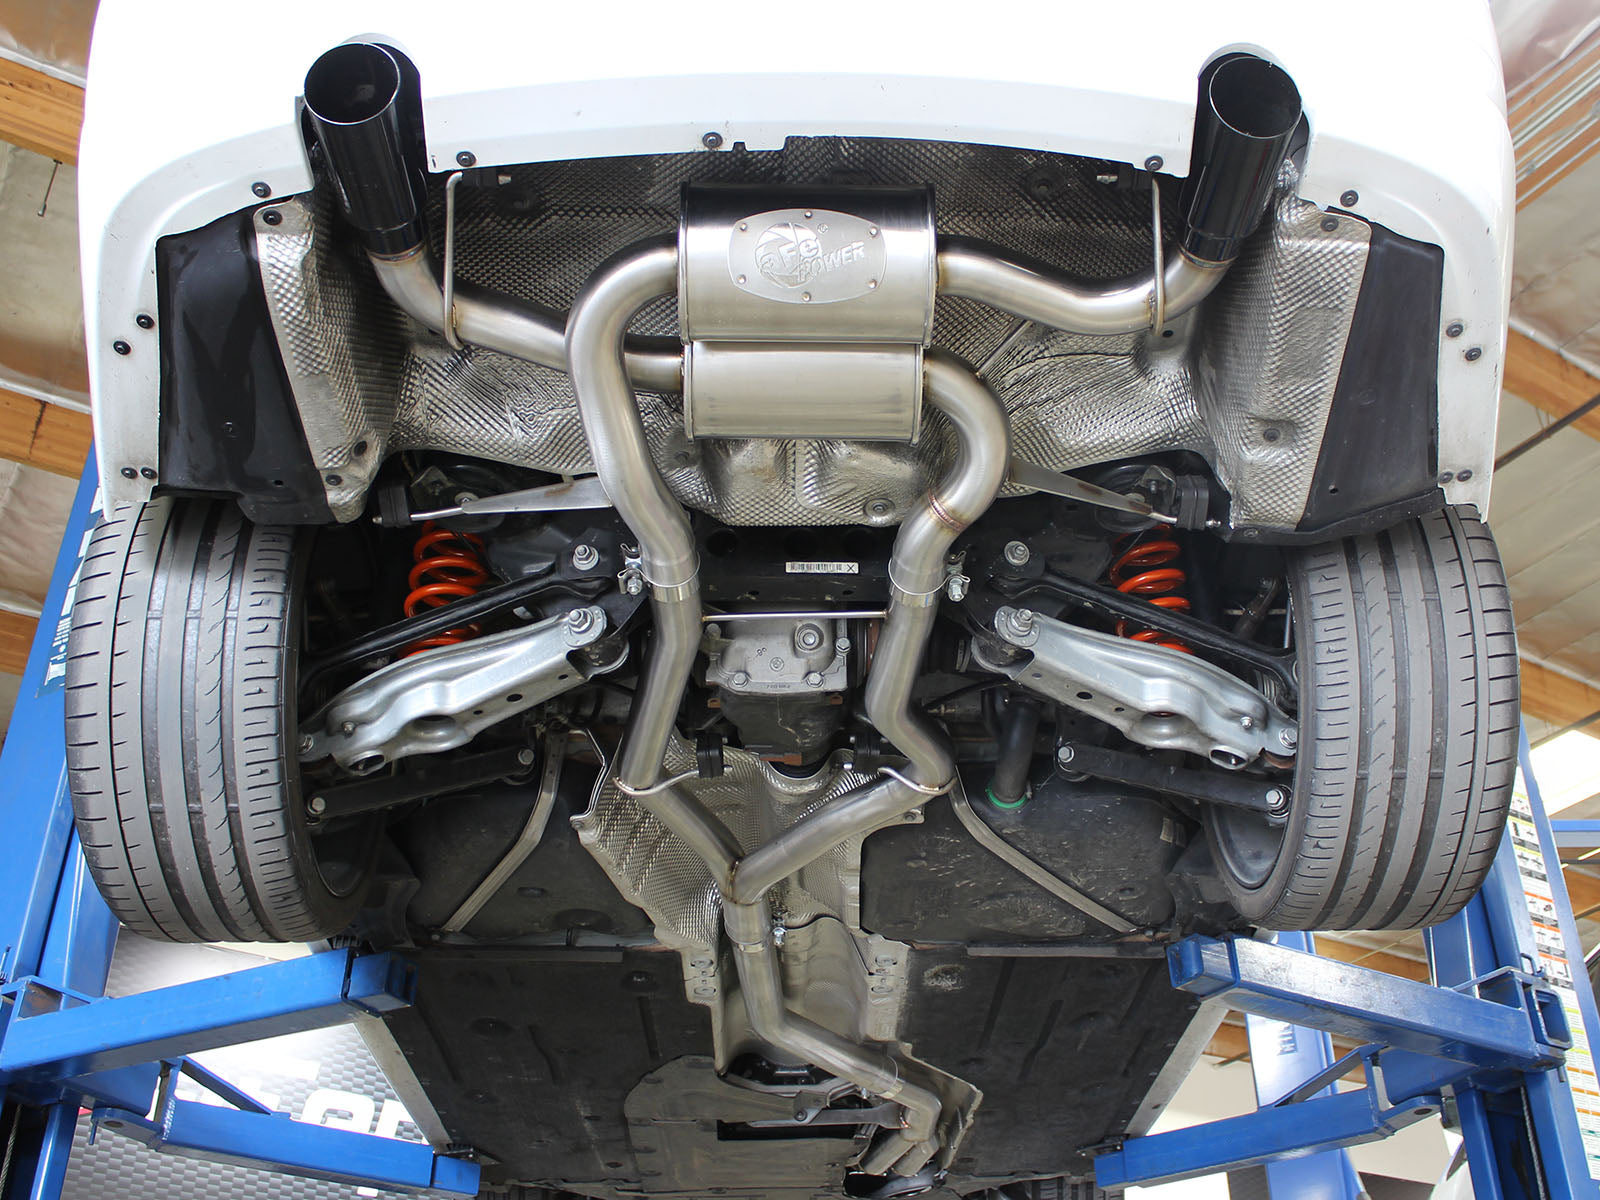 Exhaustive Series #2: Performance Exhaust Systems